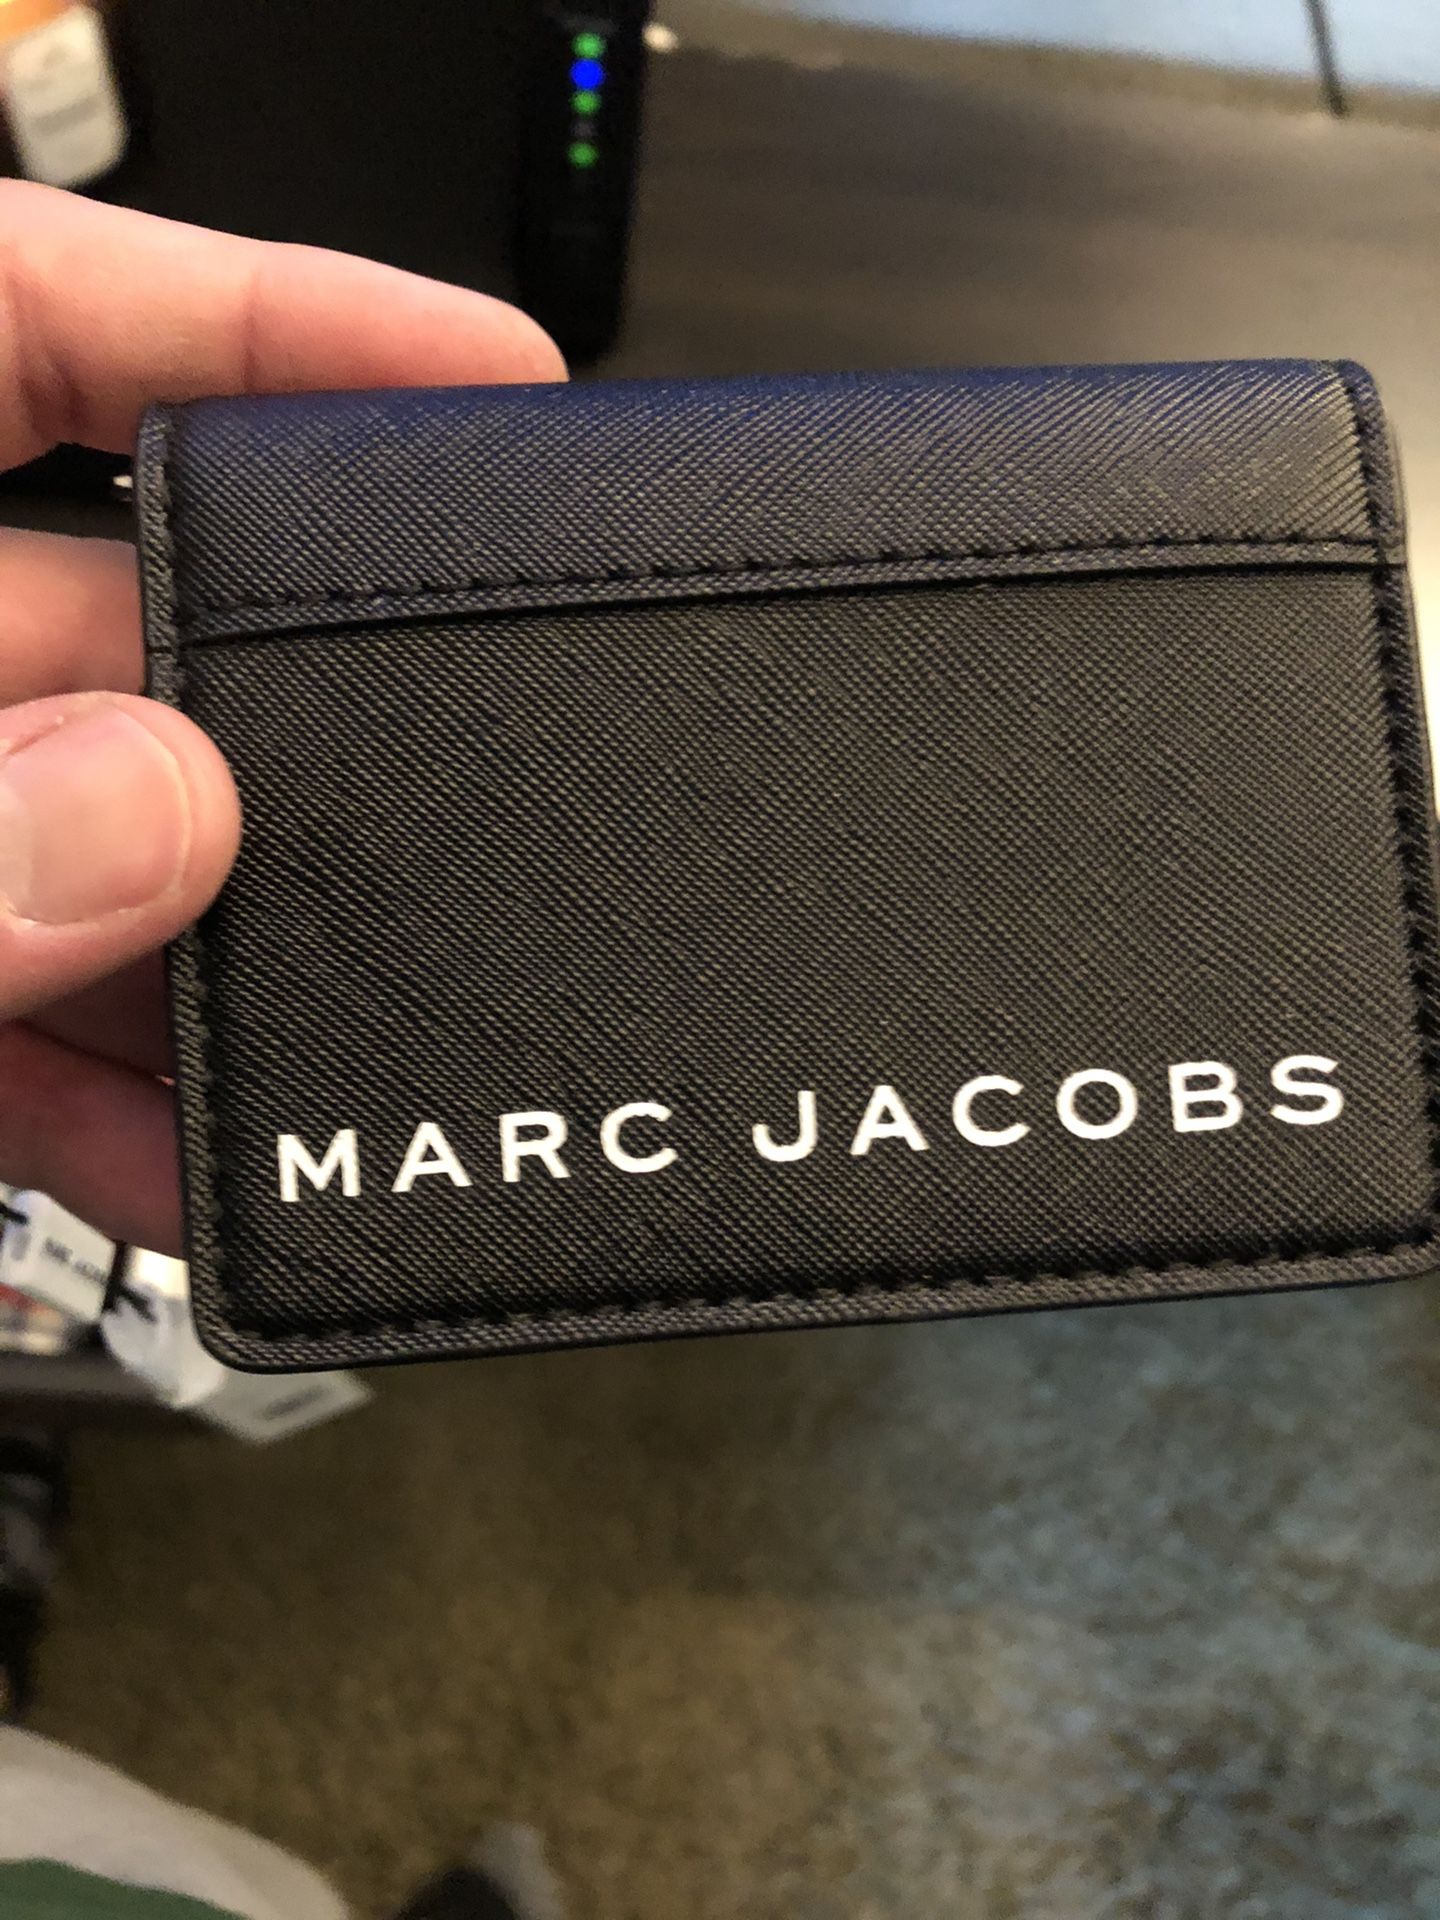 Marc Jacobs wallet (new)